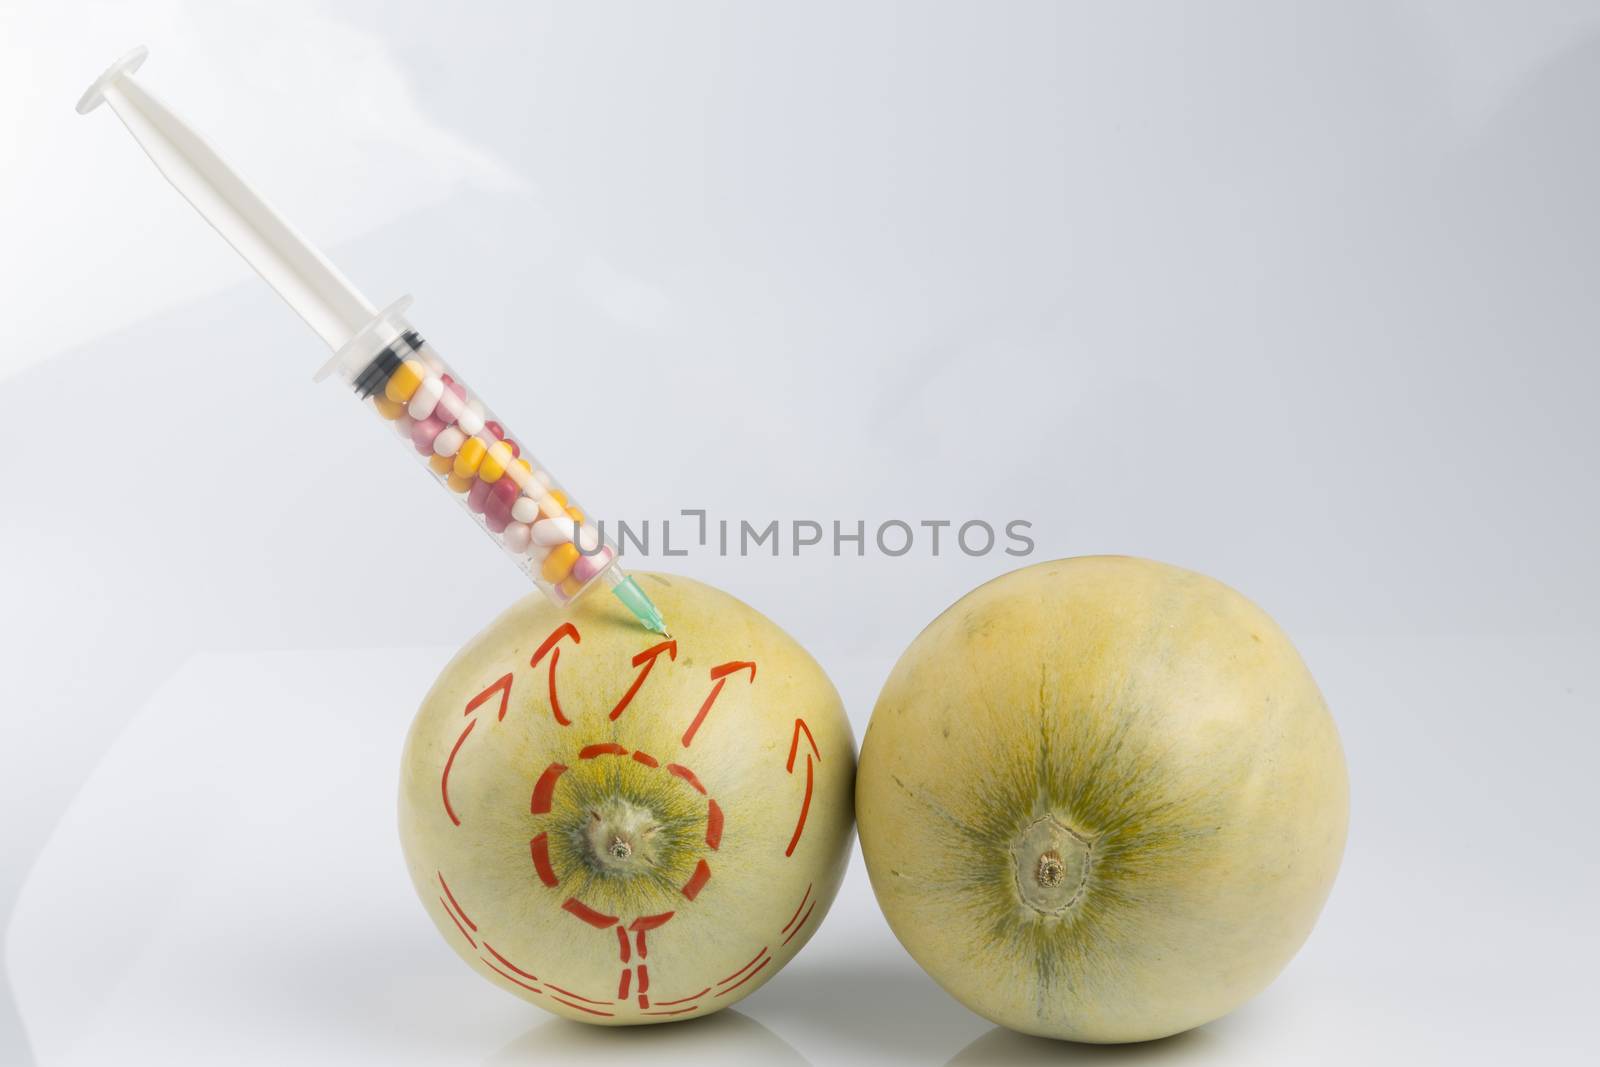 Cosmetic treatment  for Female breasts metaphor: melons with perforation lines whileand injected by a syringe with pillsmeaning cosmetic and health treatment